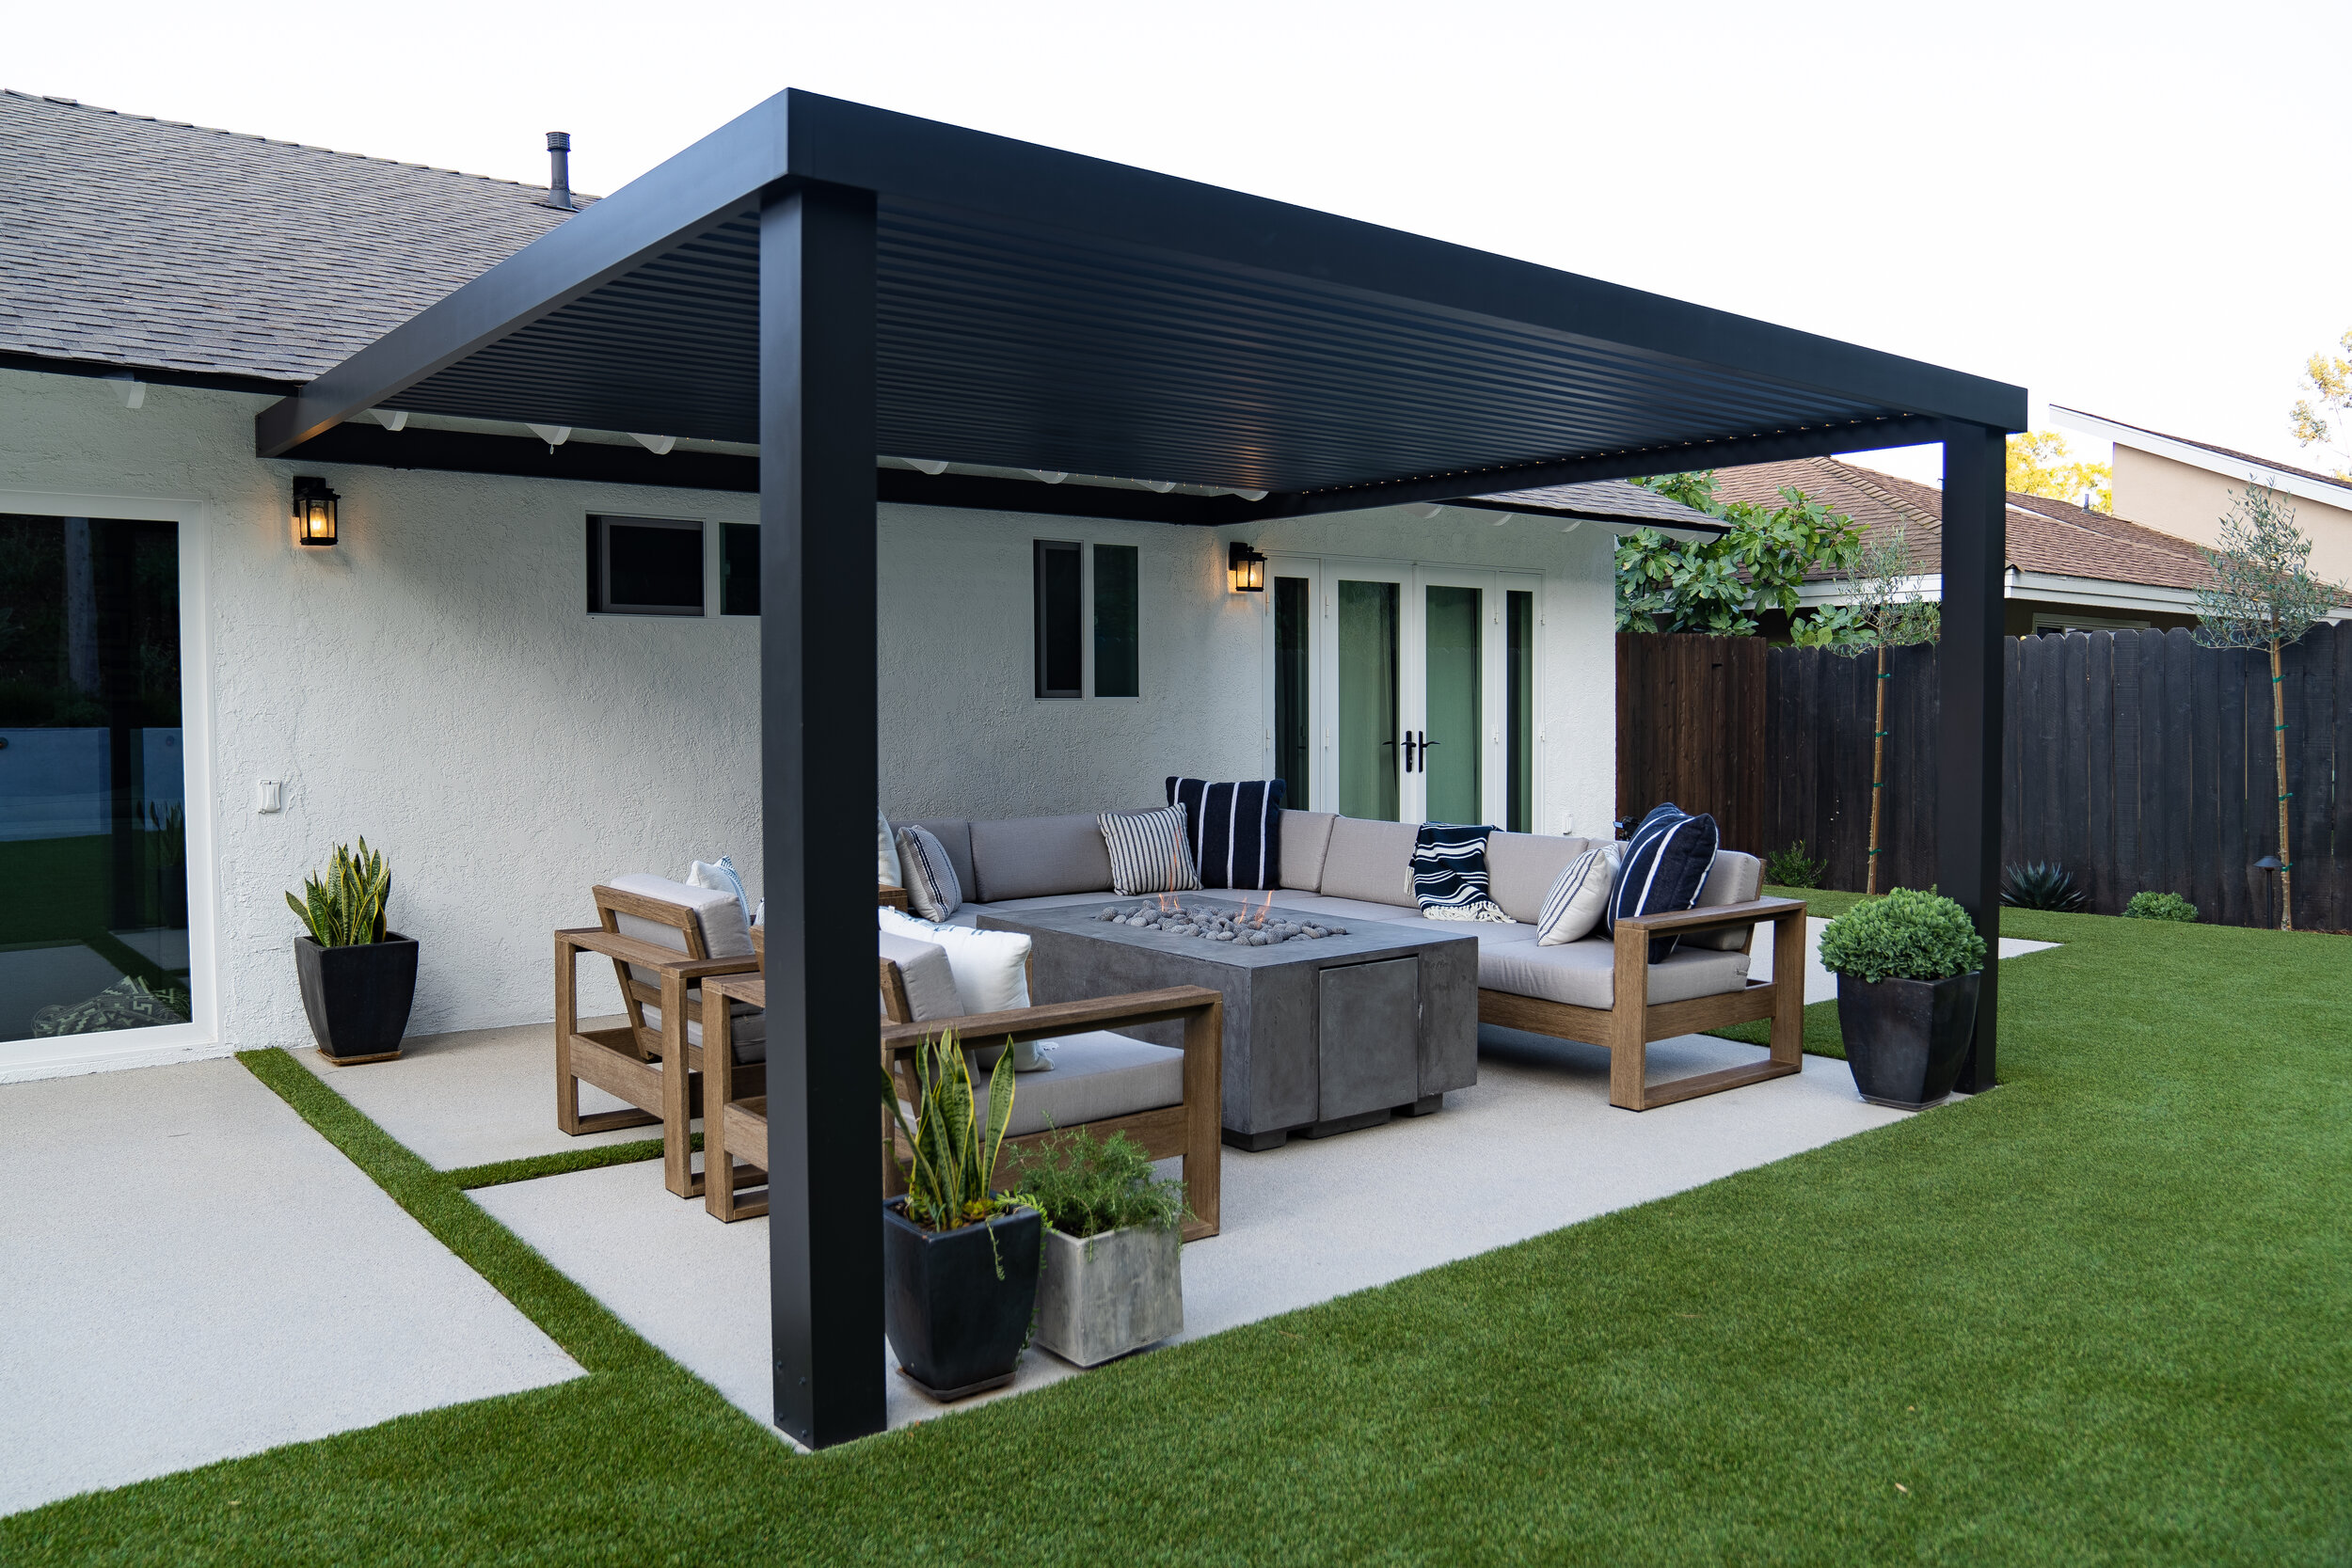 A backyard social area with fire pit and lounge couches covered with a pergola next to a lawn